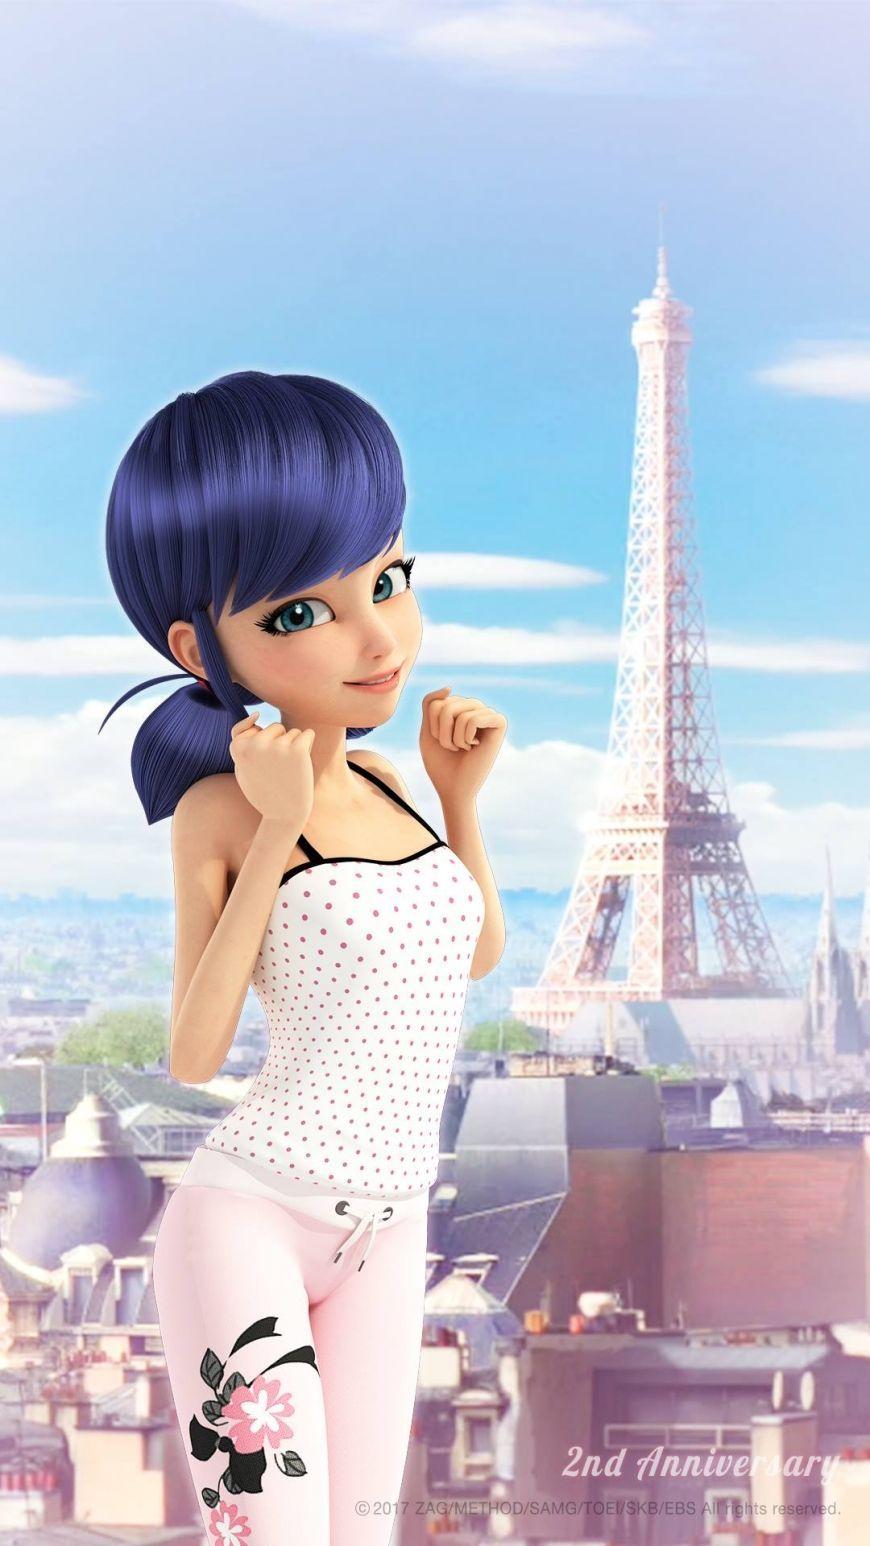 Marinette Dupain-Cheng Wallpapers - Top Free Marinette Dupain-Cheng